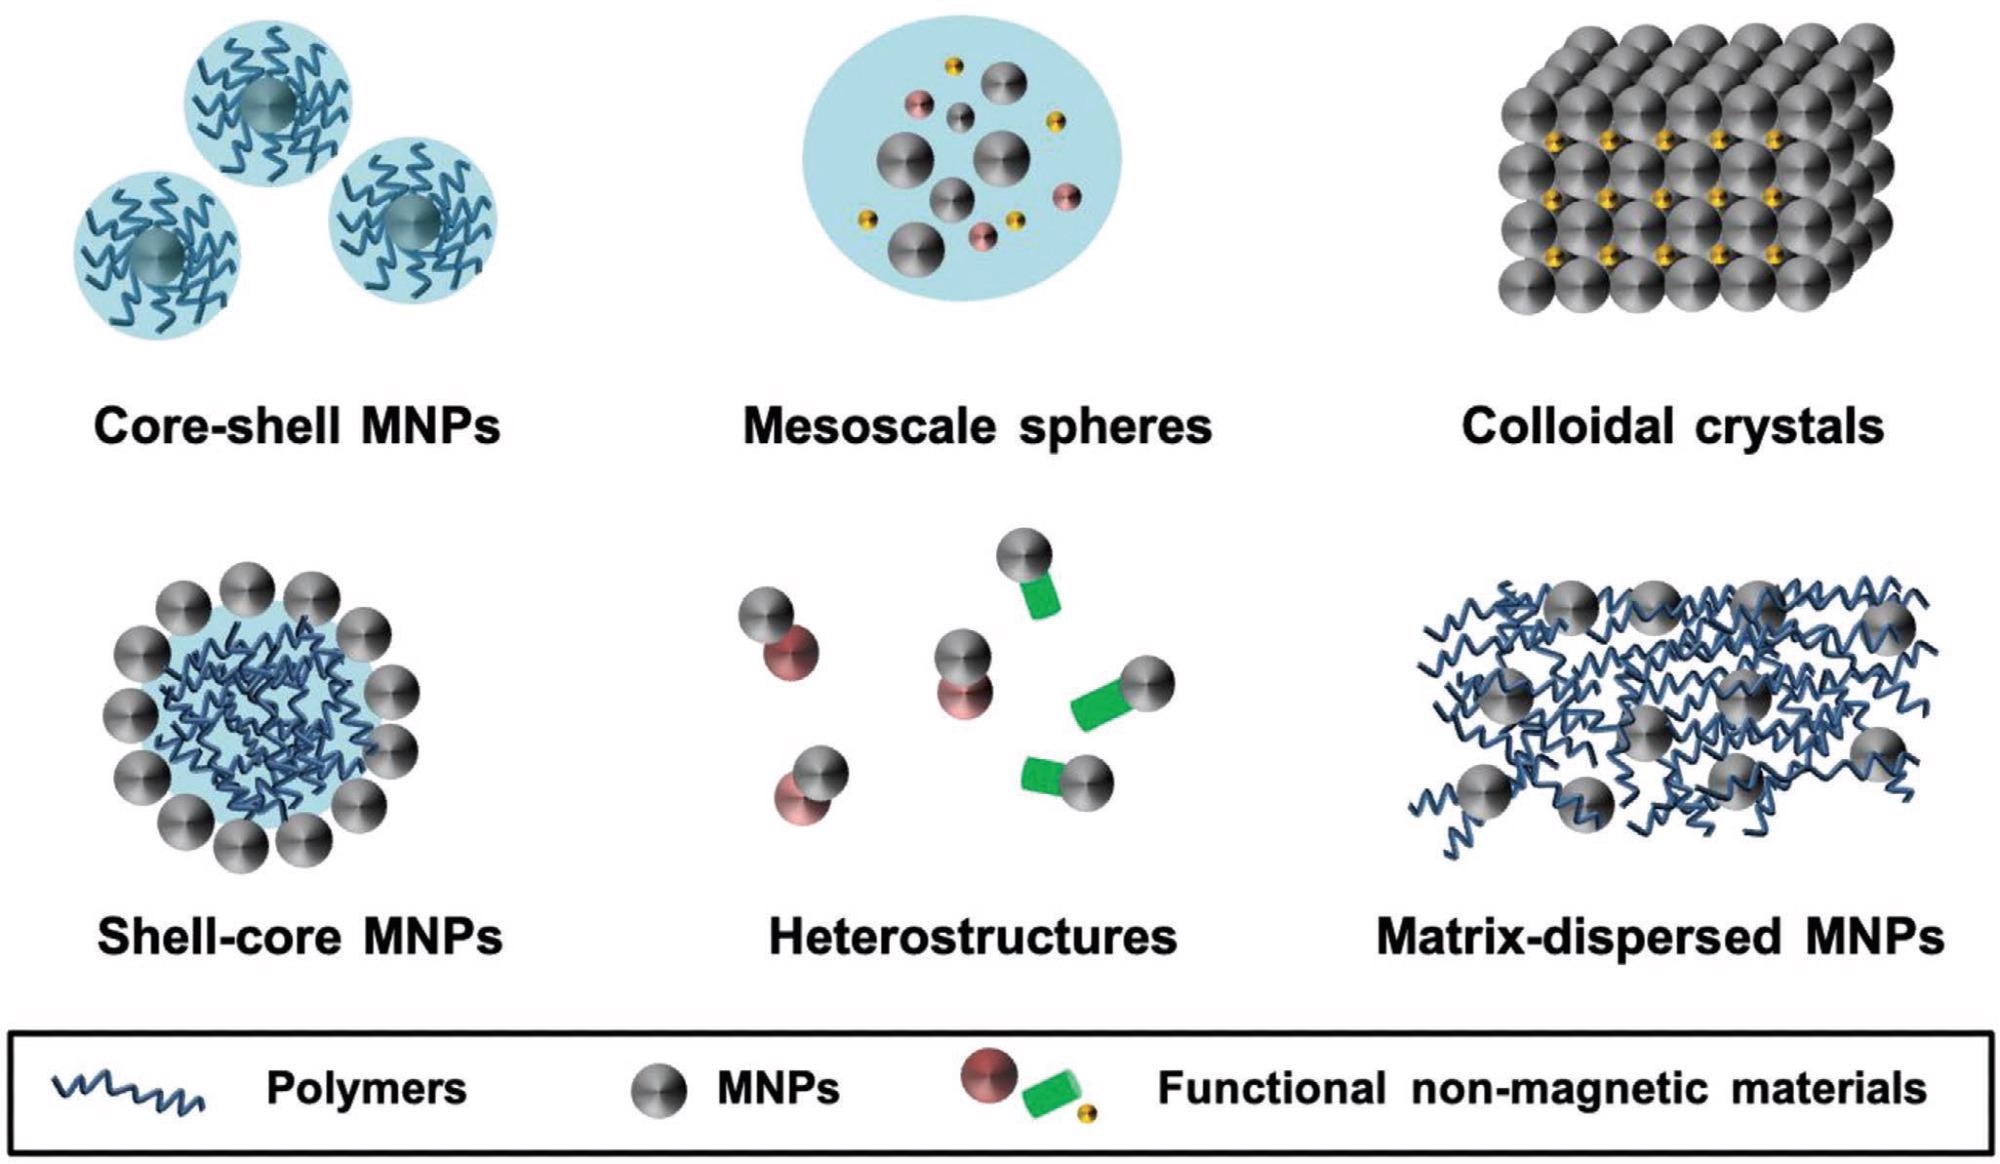 Various morphologies of MNCs. Core–shell MNPs are protected by an organic coating (e.g., polymers, ligands), whereas MNPs constitute the external layer in shell–core systems. In mesoscale spheres, MNPs are dispersed in mesoscale spherical assemblies. Heterostructures (Janus type) are bimodular materials composed of one magnetic and one nonmagnetic functionality. MNPs can be dispersed in polymeric matrices or organized in ordered crystalline configurations.